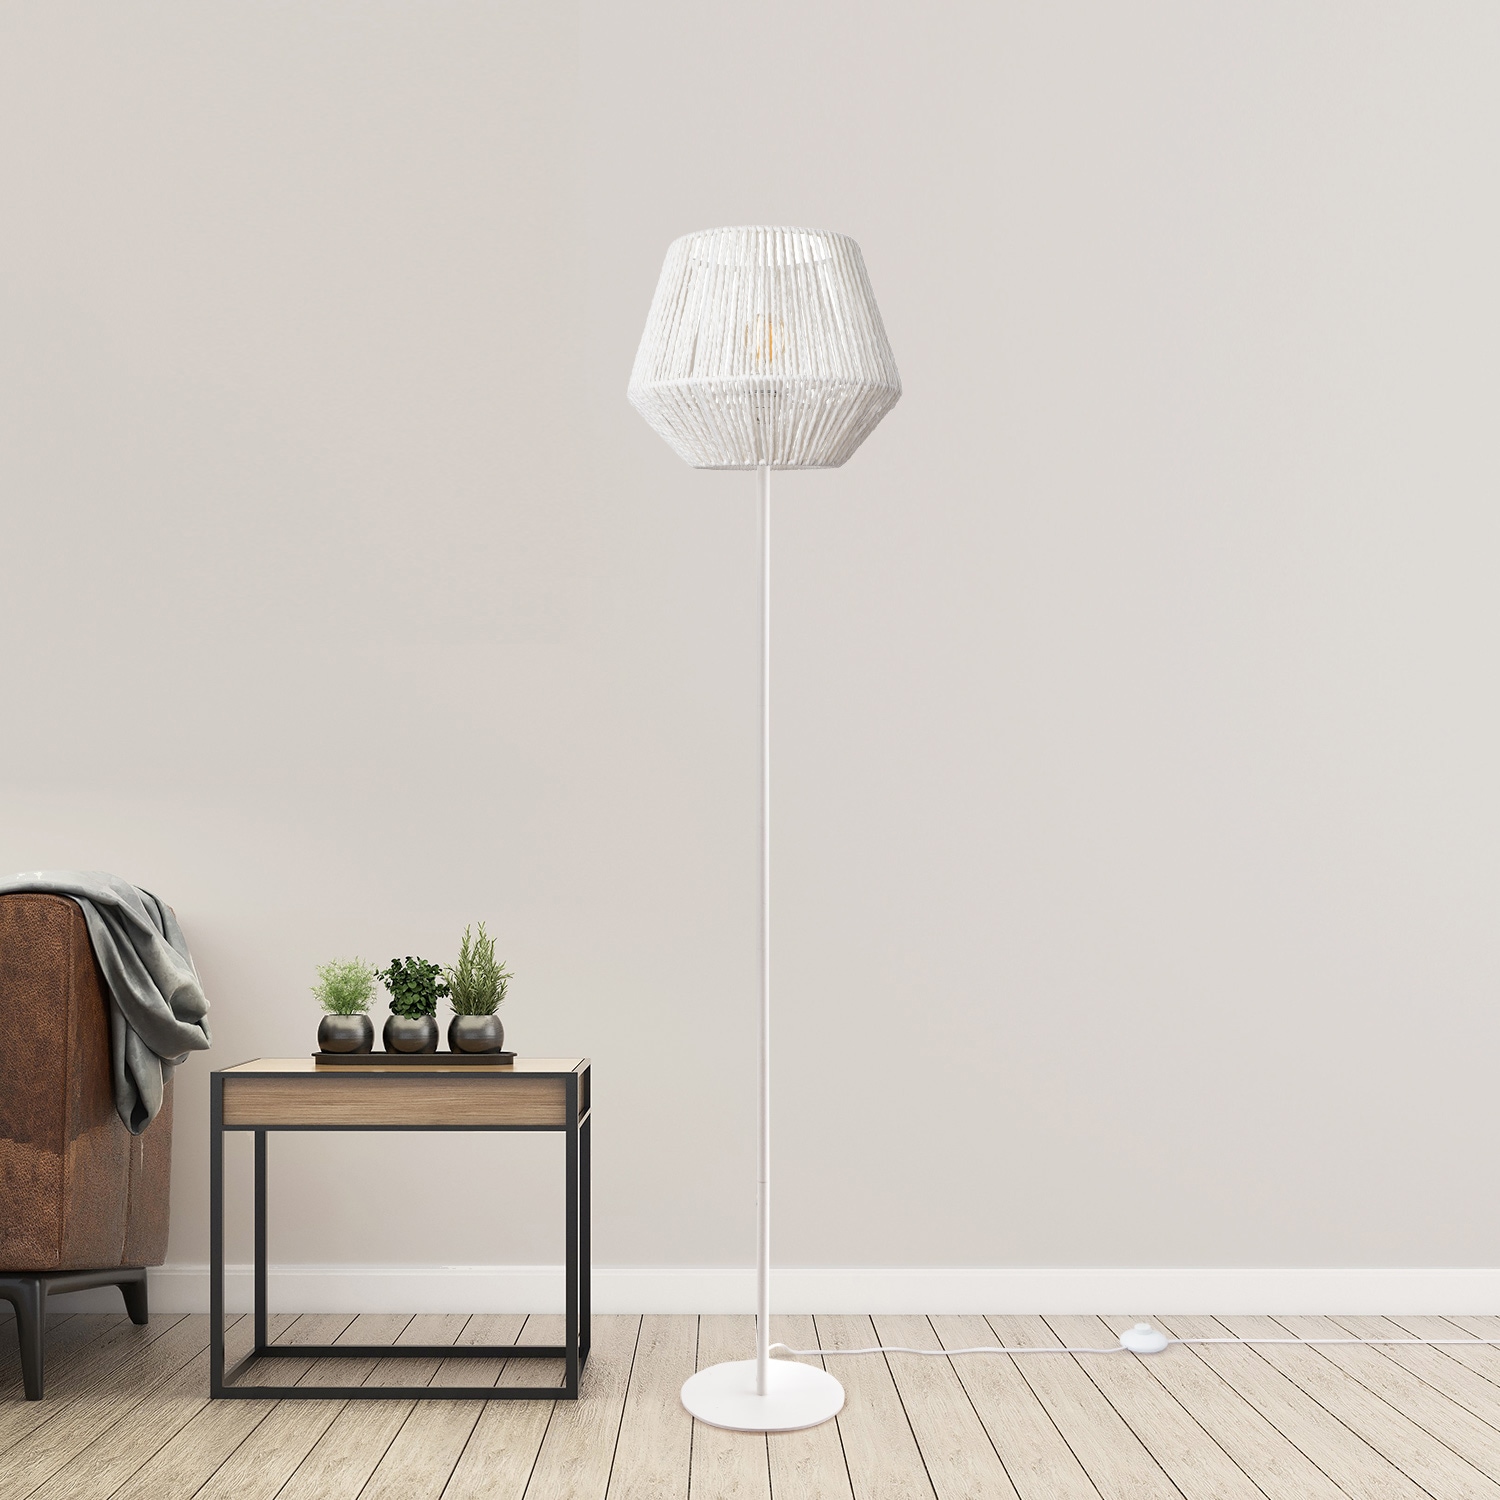 Paco Home Stehlampe »Pinto«, 1 flammig-flammig, moderne LED Lampe in Boho Optik, Wohnzimmer, Schlafzimmer, Fassung E27